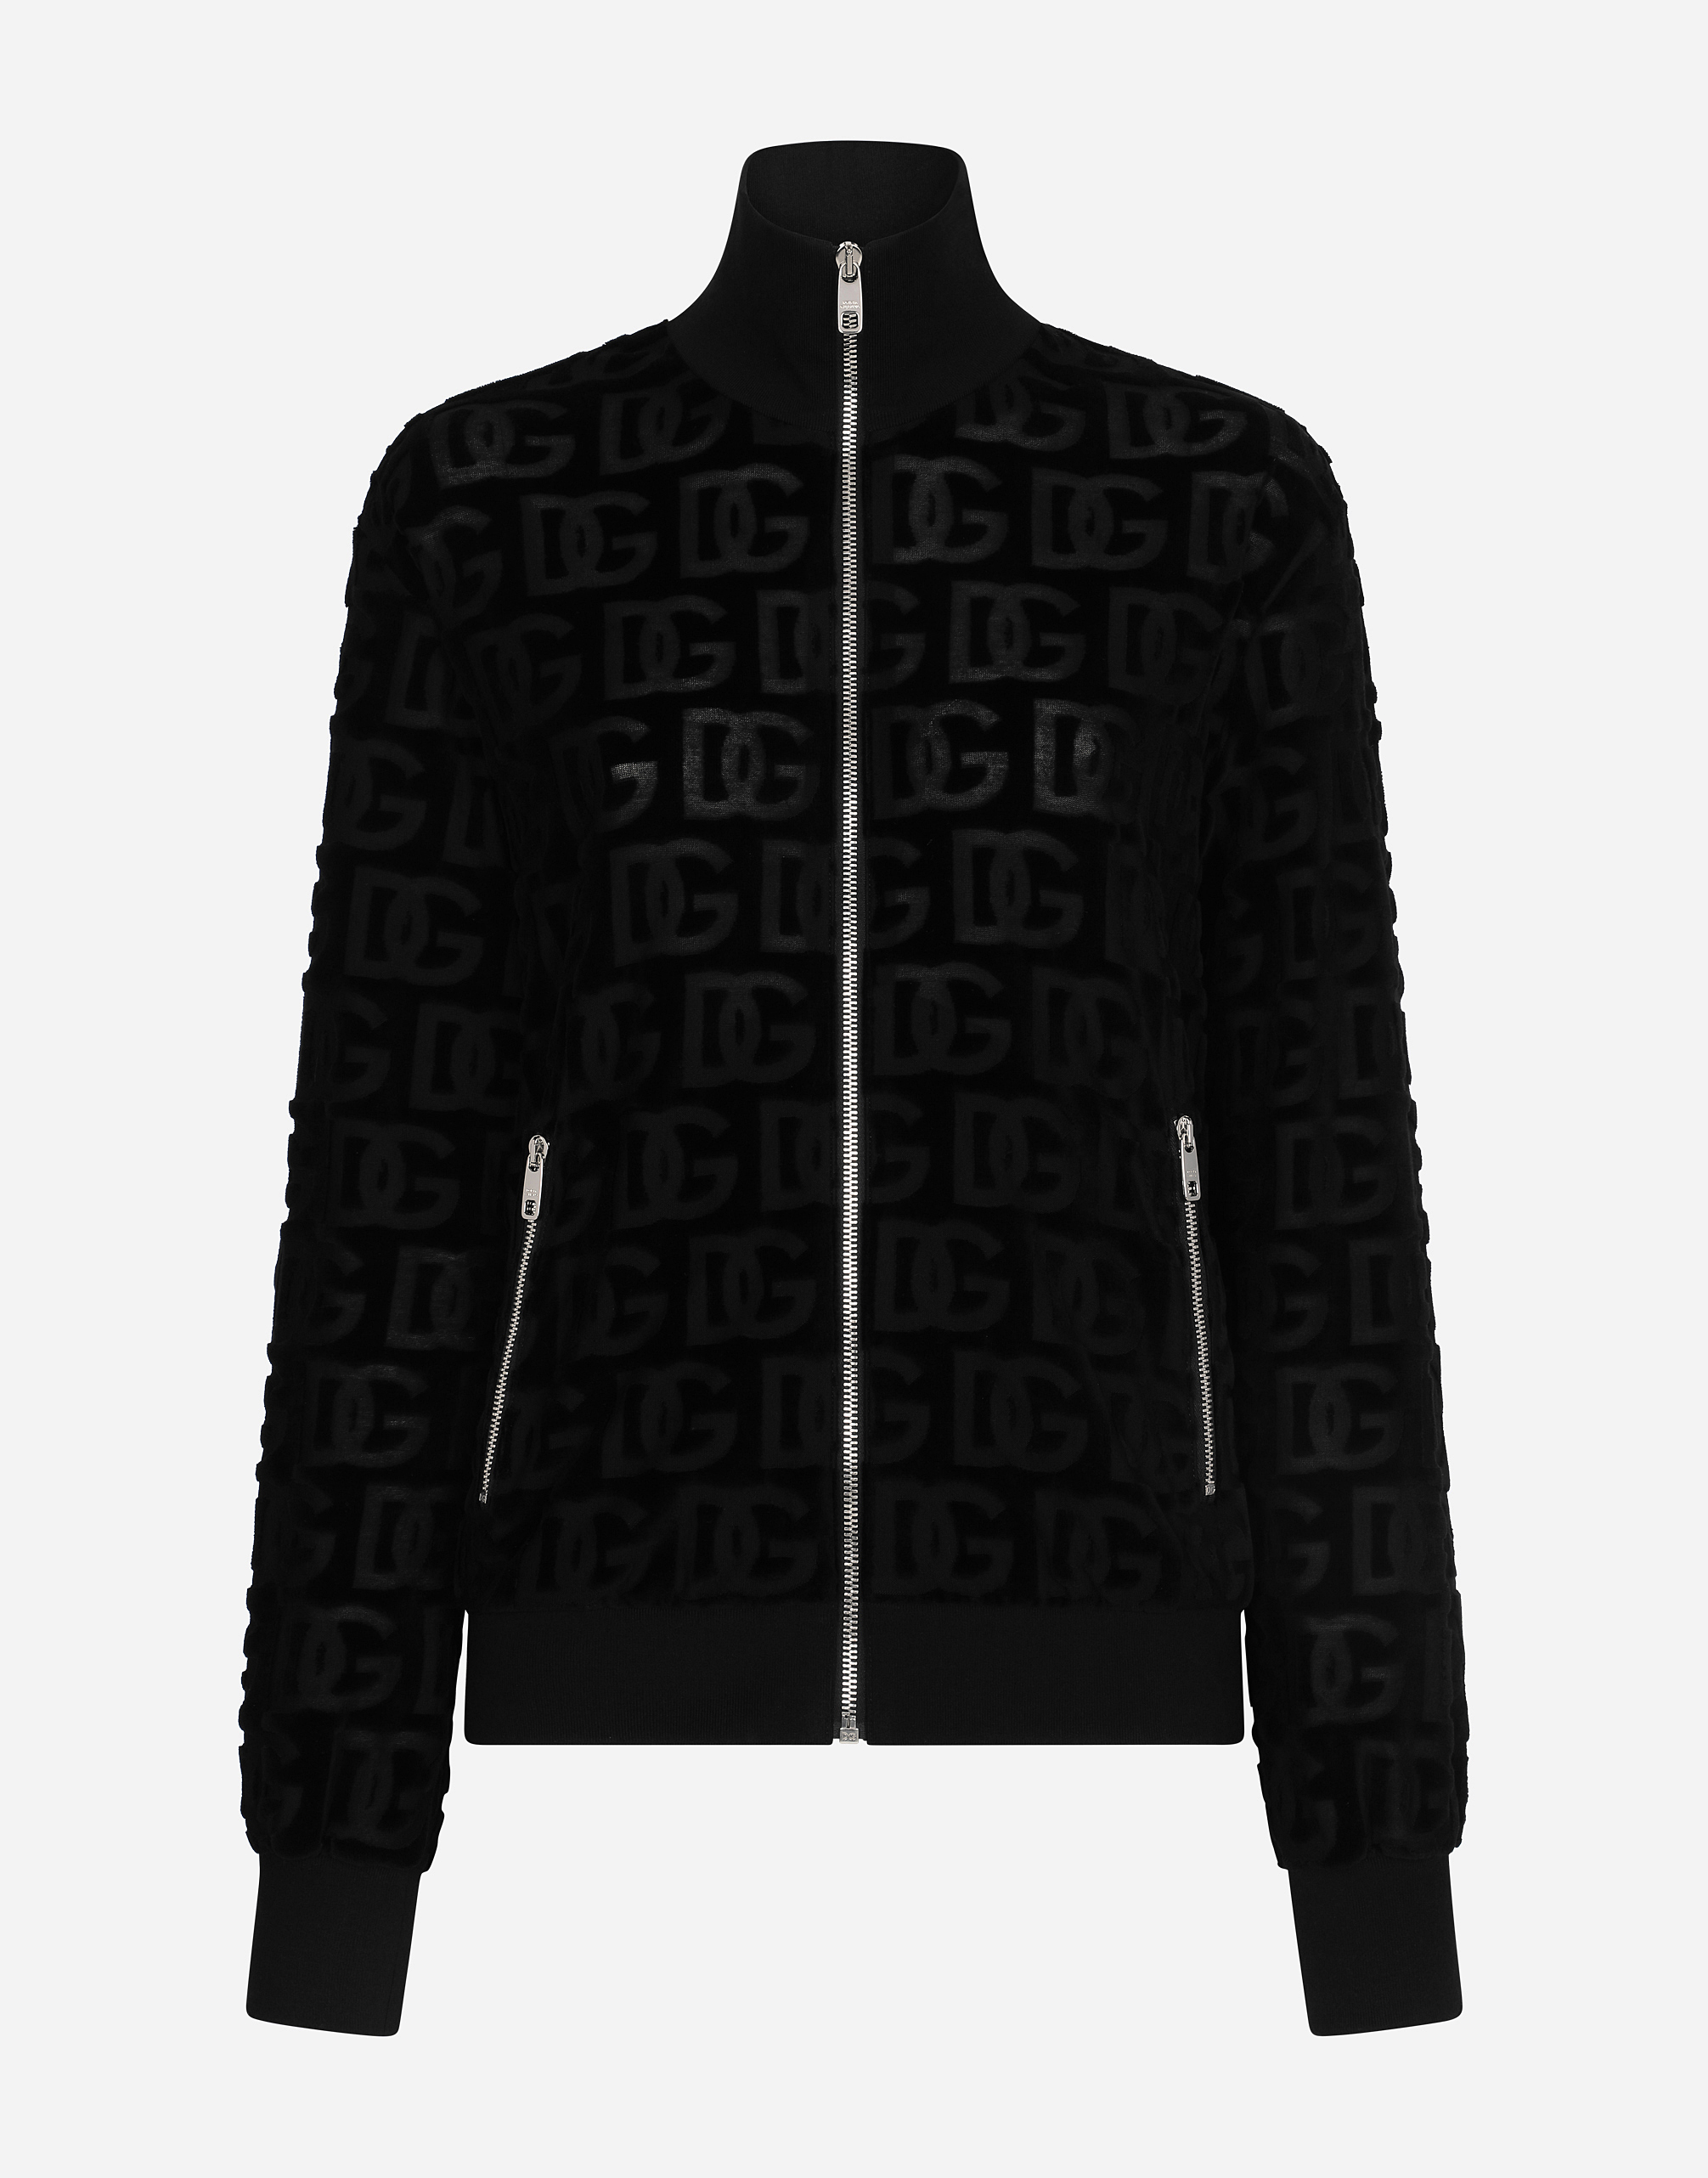 Jacquard jersey sweatshirt with all-over DG detail and zipper in Black